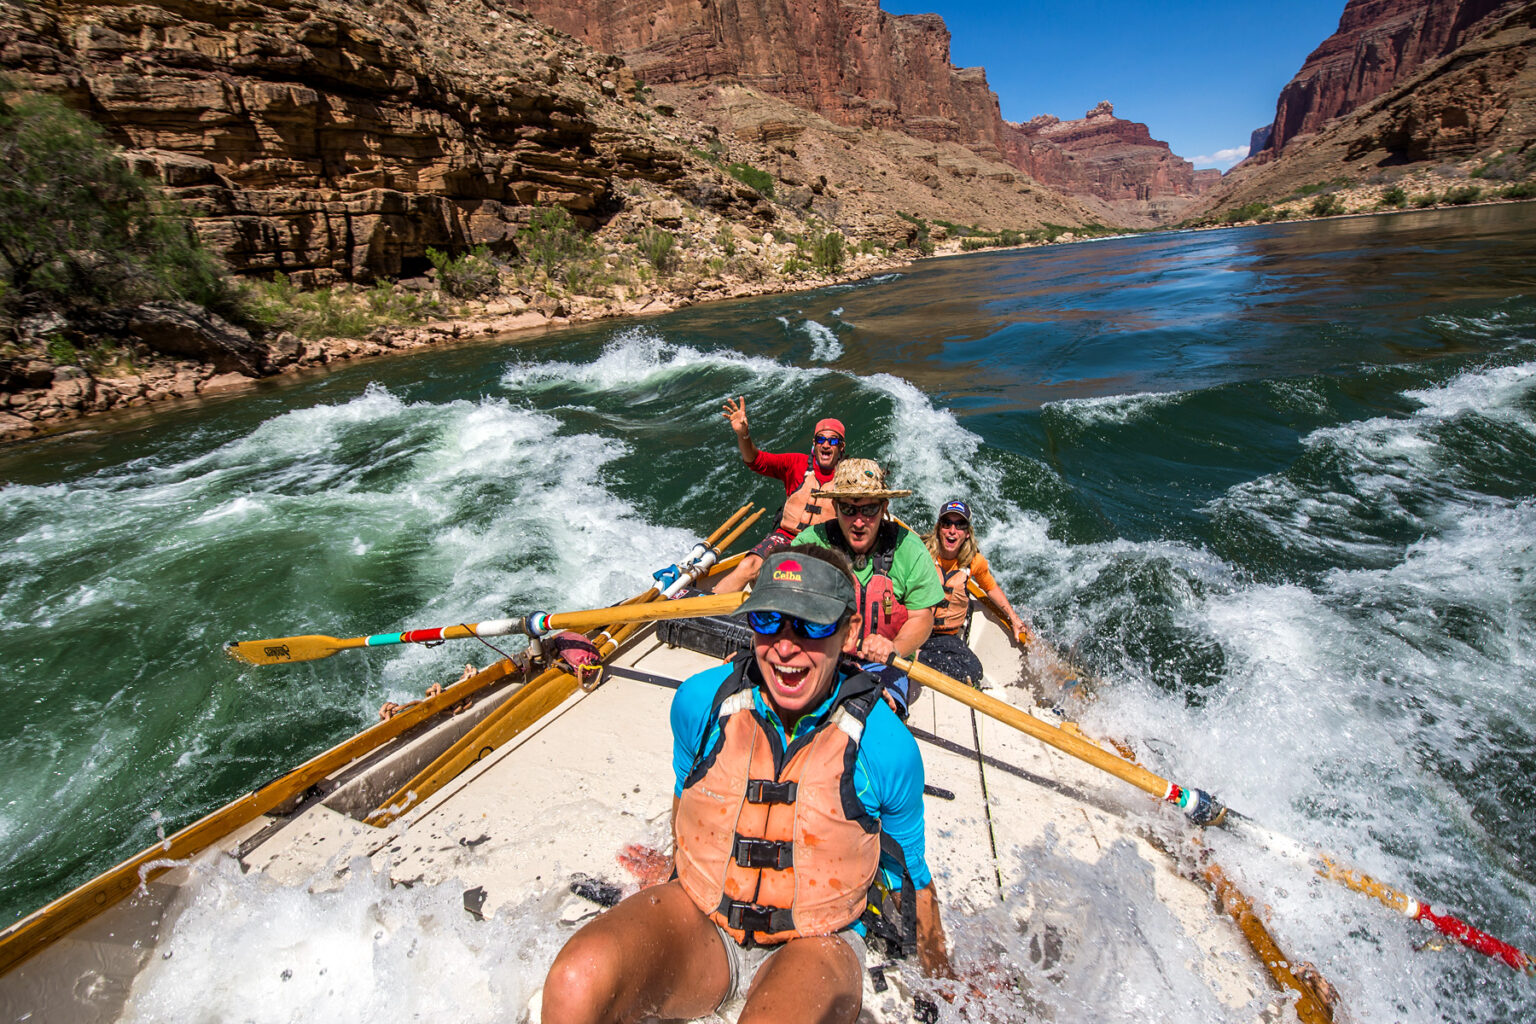 A dory rowed by a guide with three guests as they go through a rapid on the Colorado River in Grand Canyon